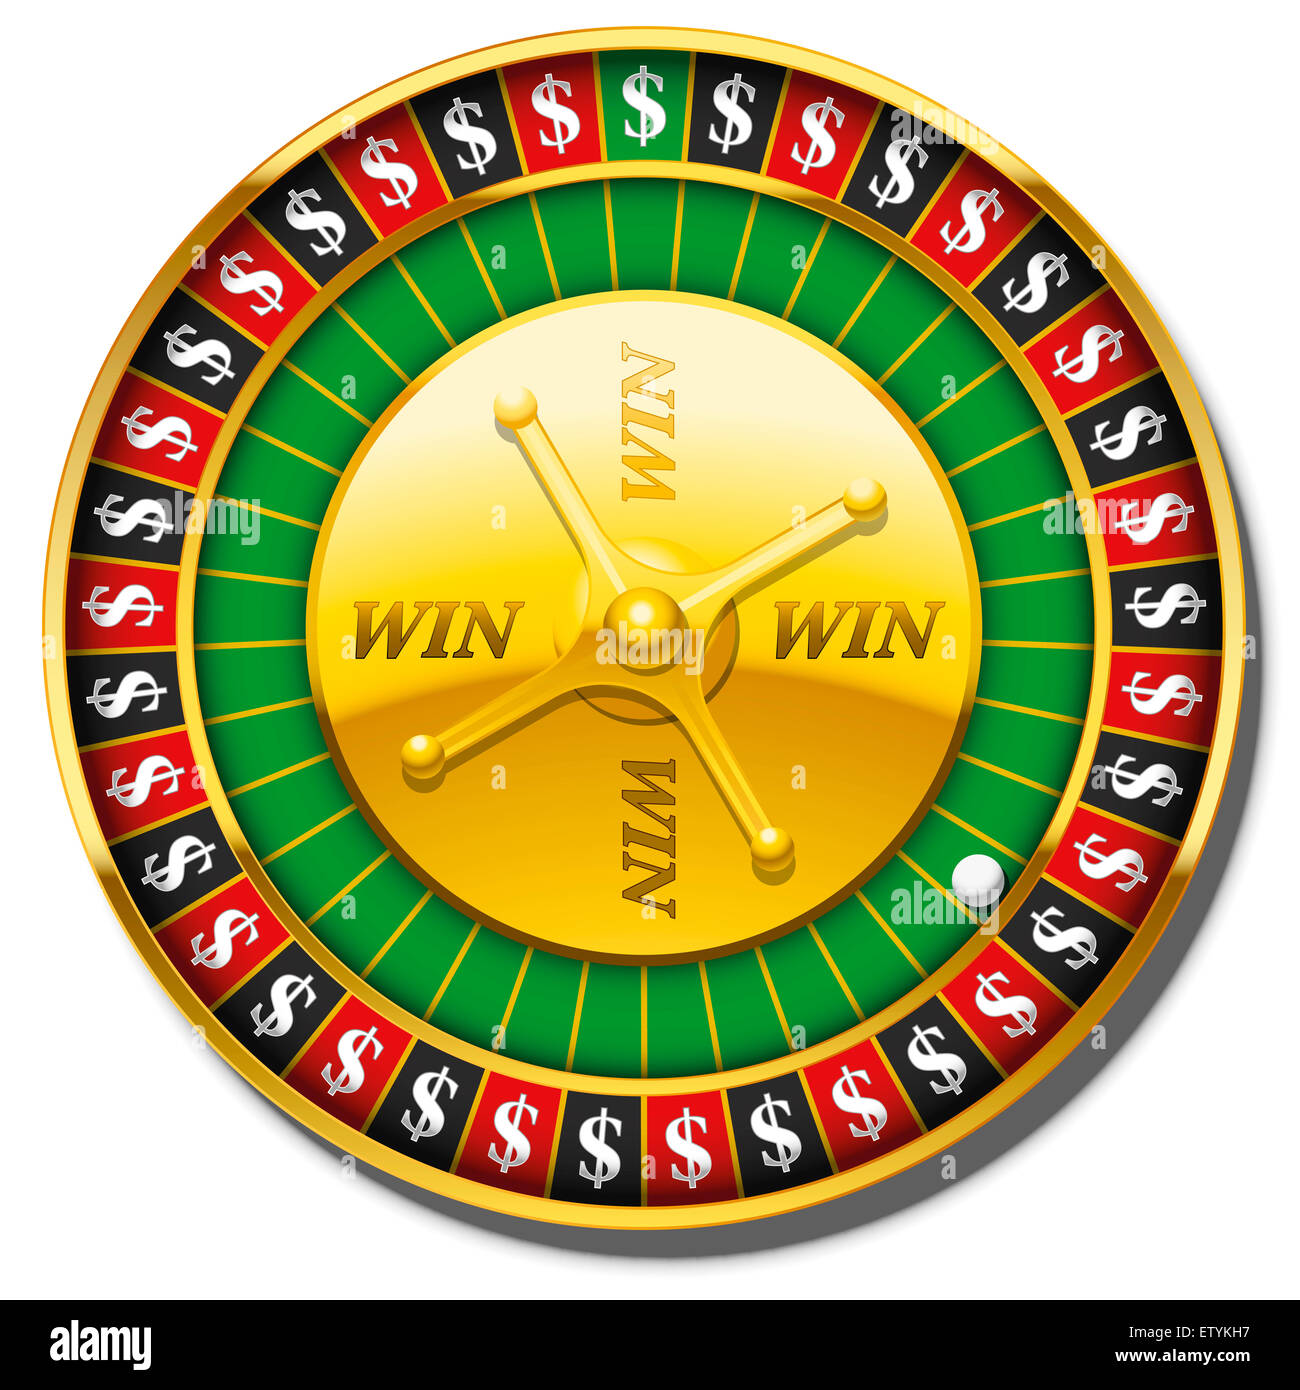 Roulette wheel with dollar symbol instead of numbers and the words WIN on the golden plate. Stock Photo